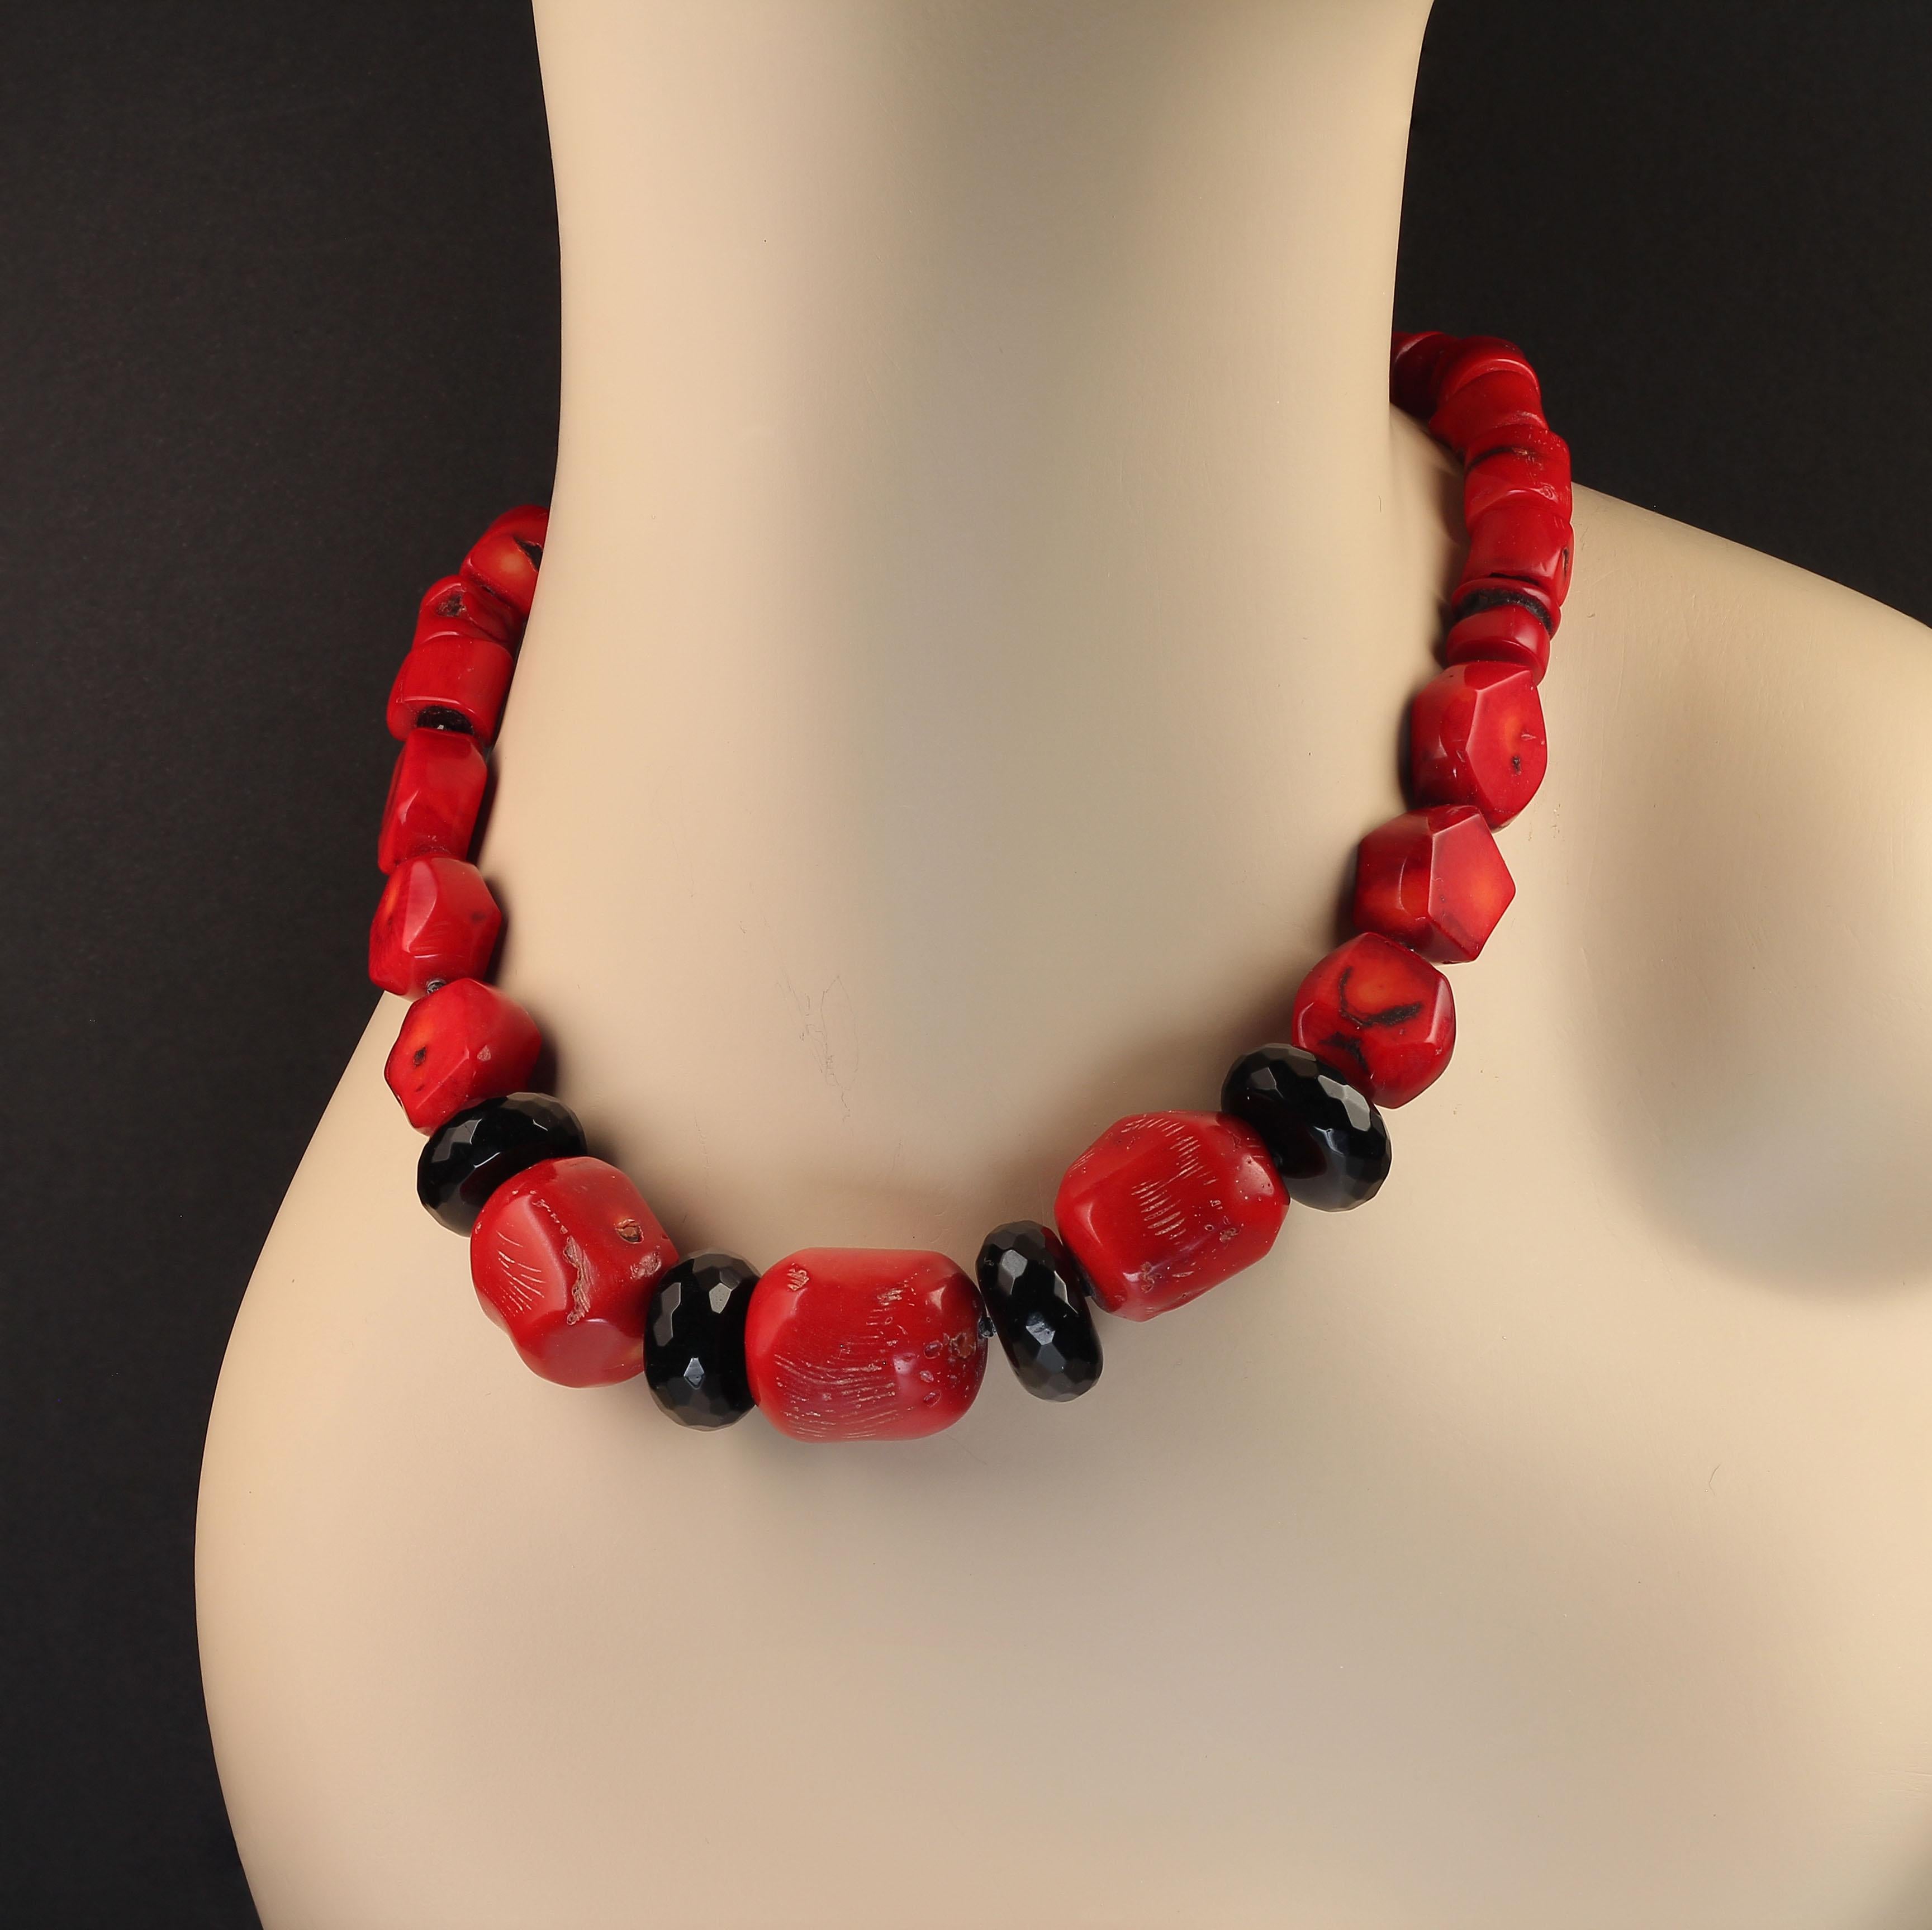 Fashionable Graduated Red Bamboo Coral with Black Faceted Onyx Accents. Larger coral pieces sit in the front of this necklace accented with large sparkling Black Onyx Rondels. This necklace feels so good on your neck. It is just the right size at 19